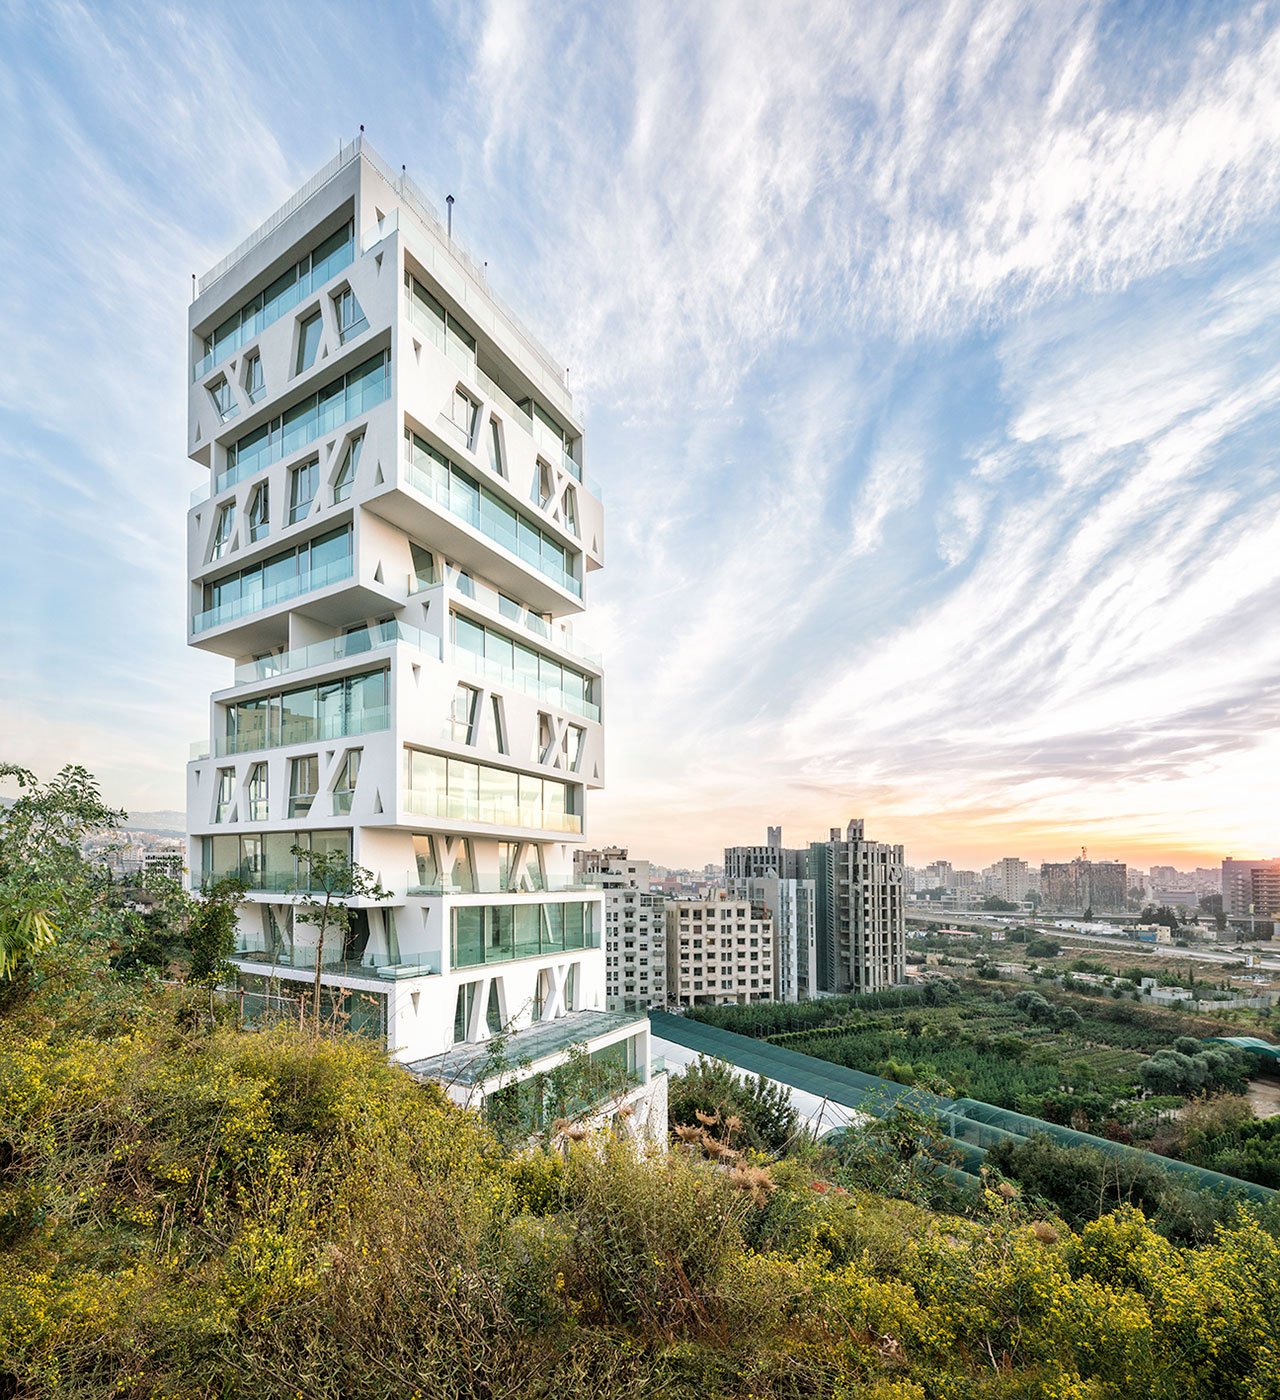 The Cube Tower in Beirut, Lebanon by Orange Architects.
Photo © Matthijs van Roon.